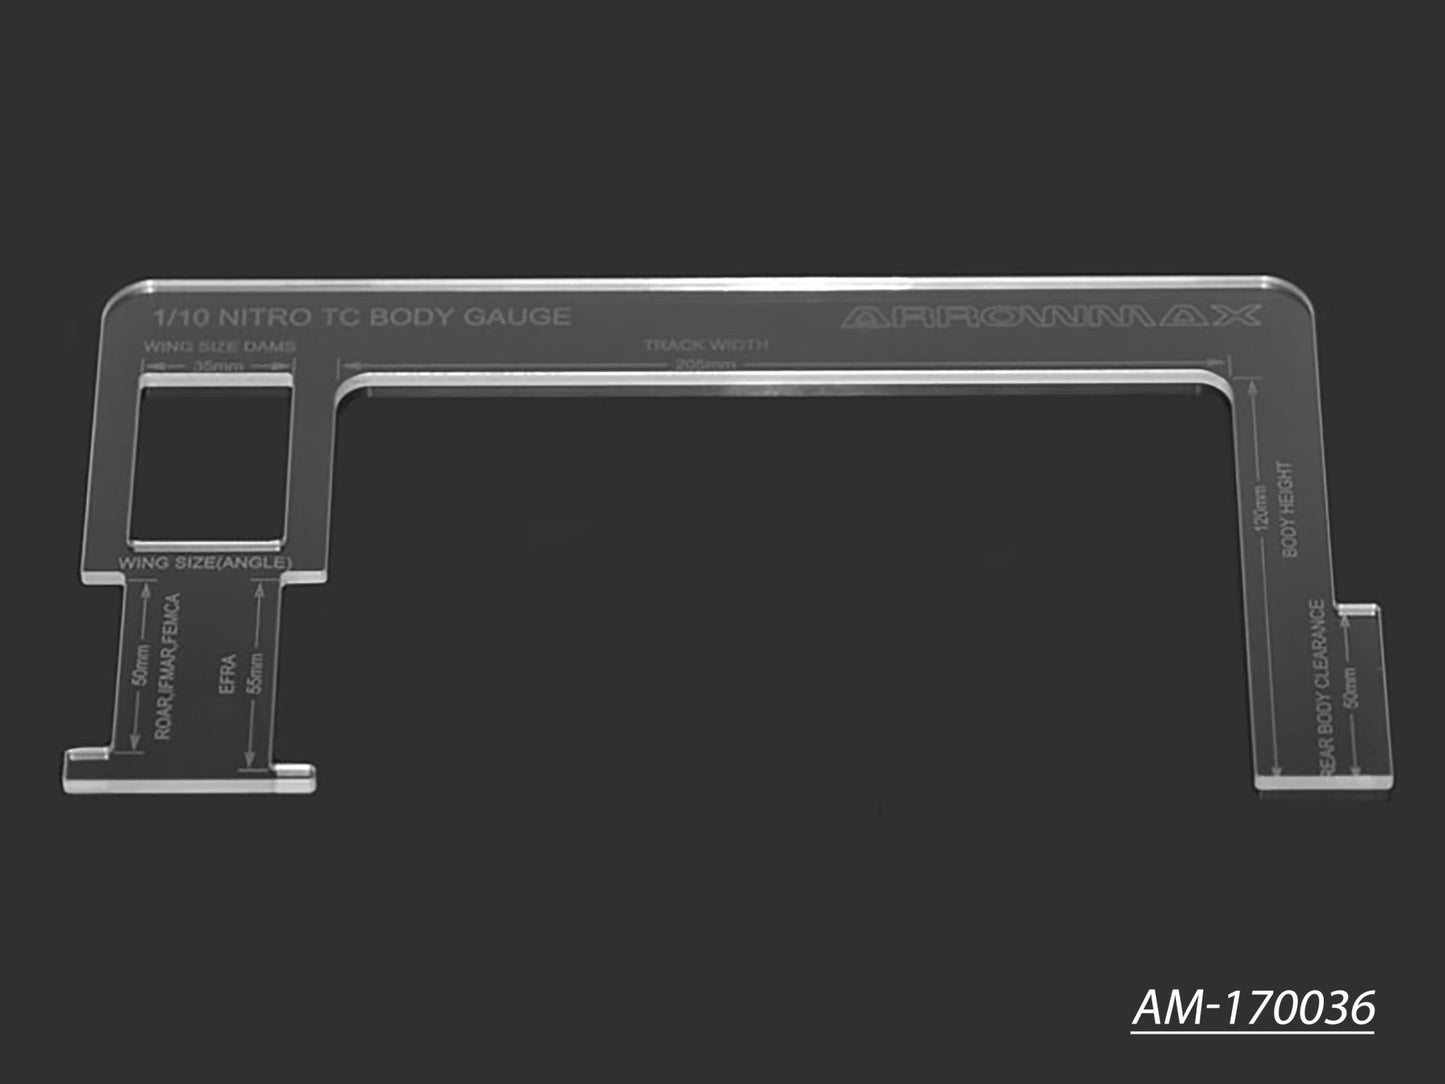 Body Gauge For 1/10 Nitro Touring Cars (AM-170036)